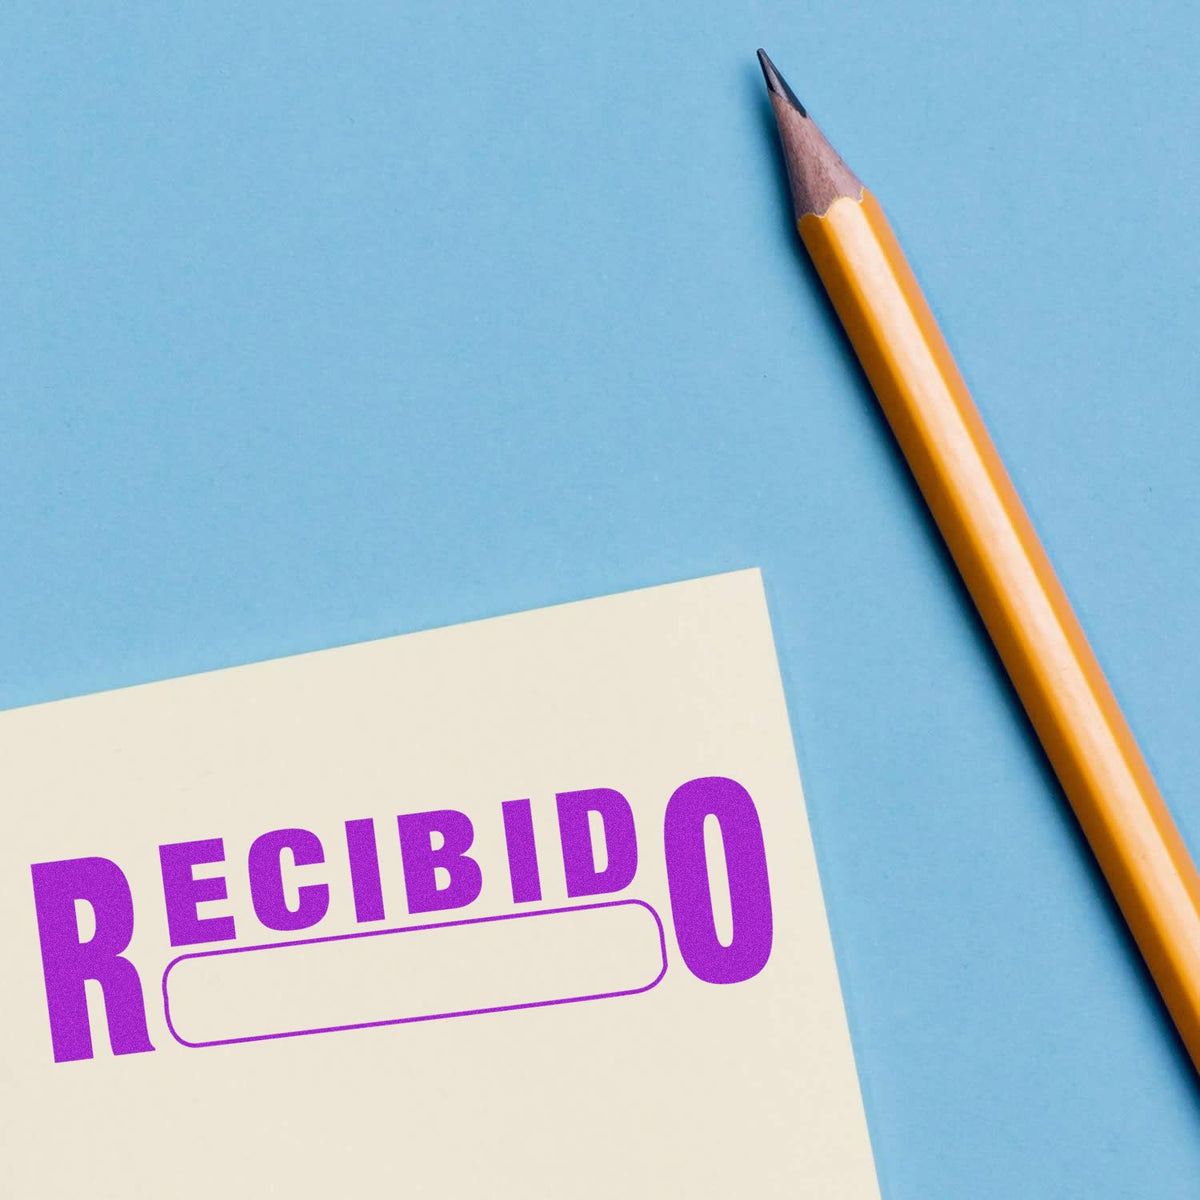 Large Recibido Rubber Stamp In Use